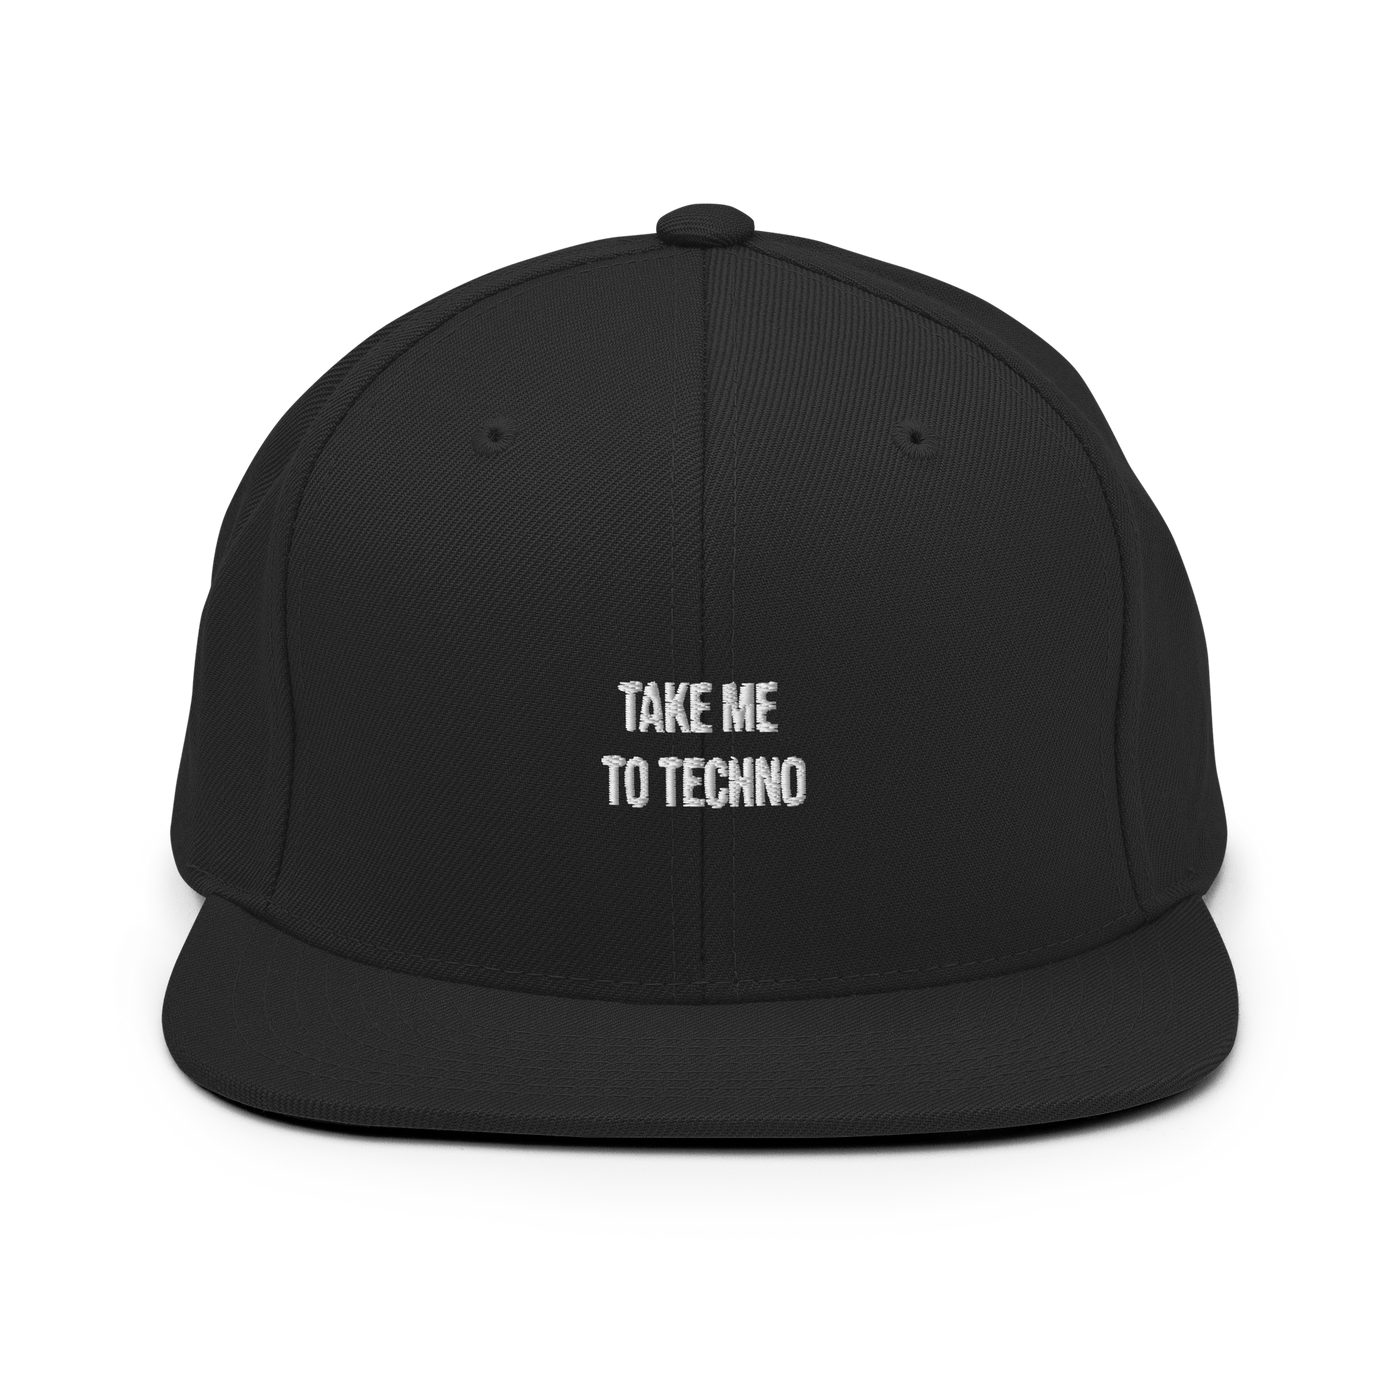 Take me to techno Snapback - Black - - Just Another Cap Store